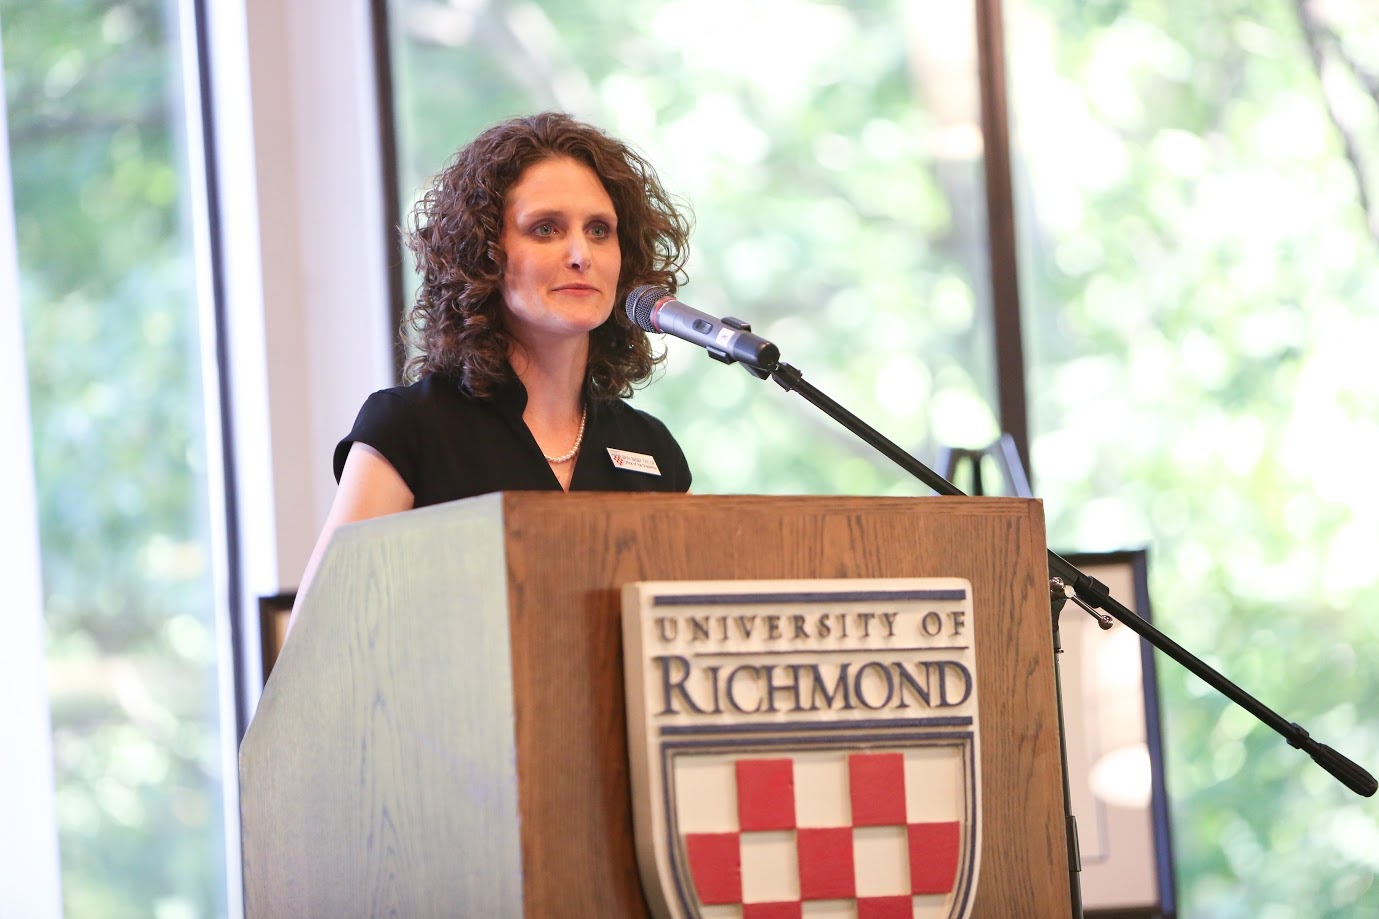 Bryn Taylor speaking at a lectern displaying the University of Richmond shield.